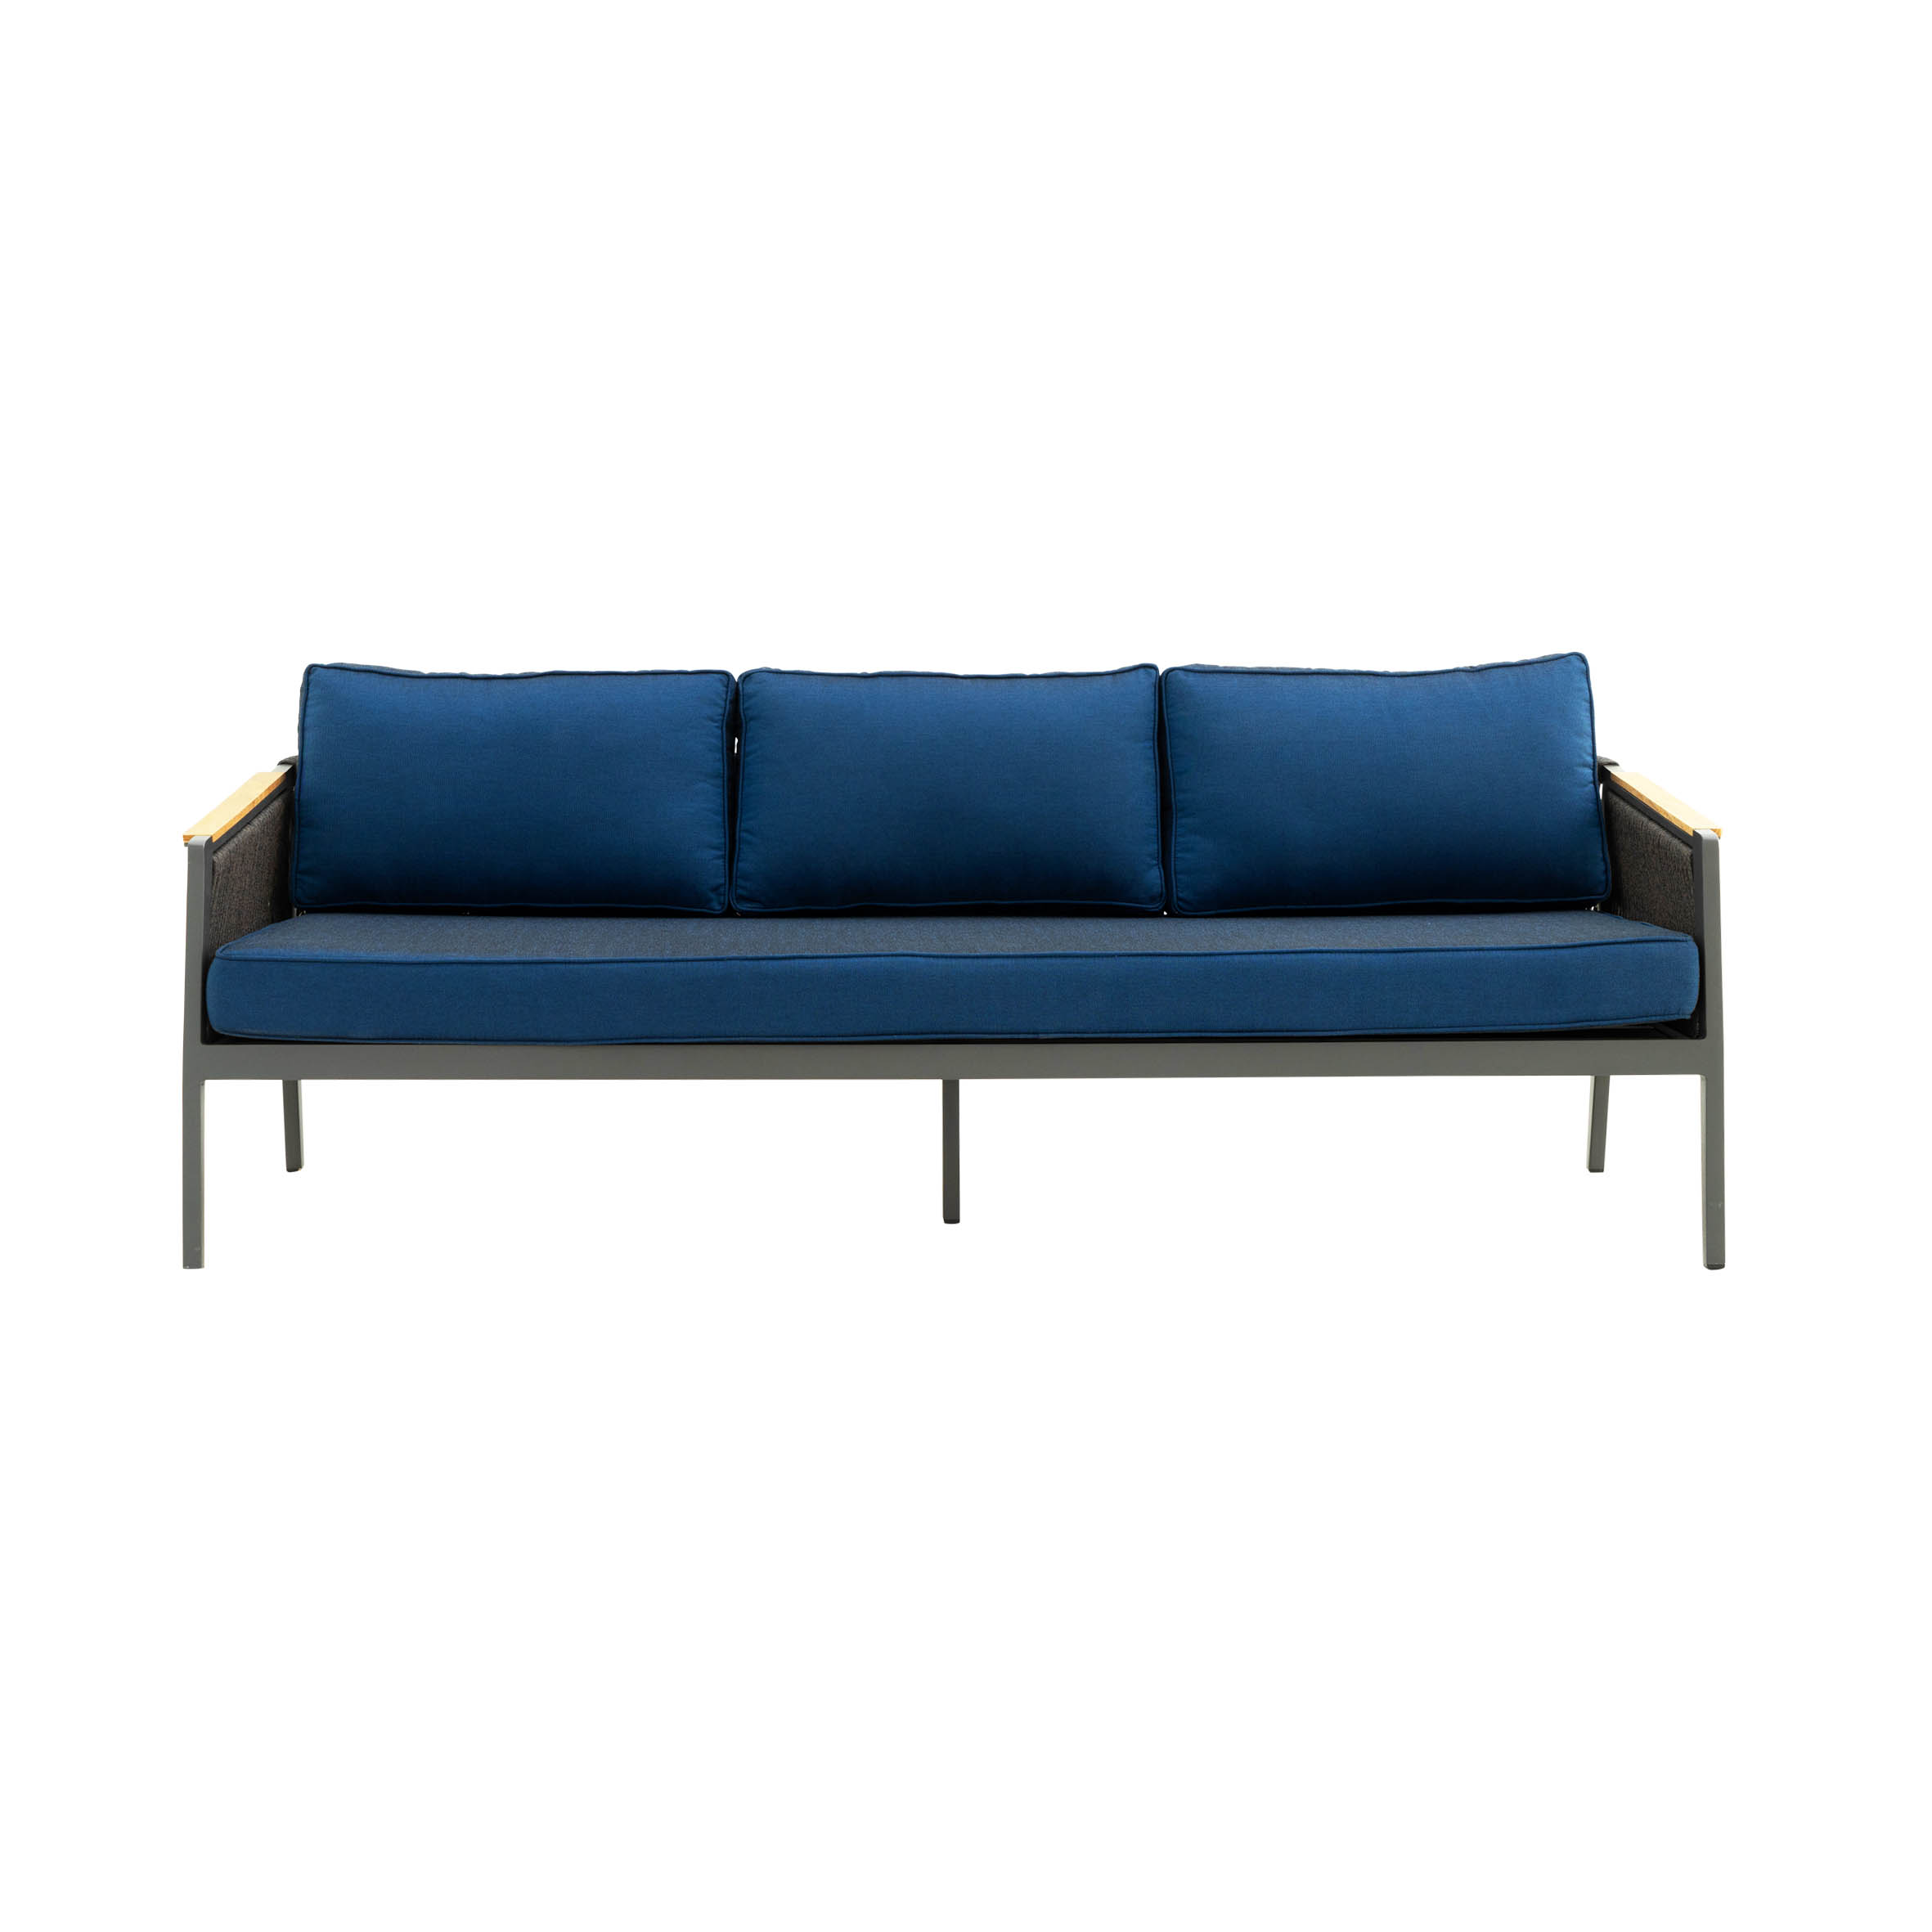 Norland rope 3-seat sofa S3